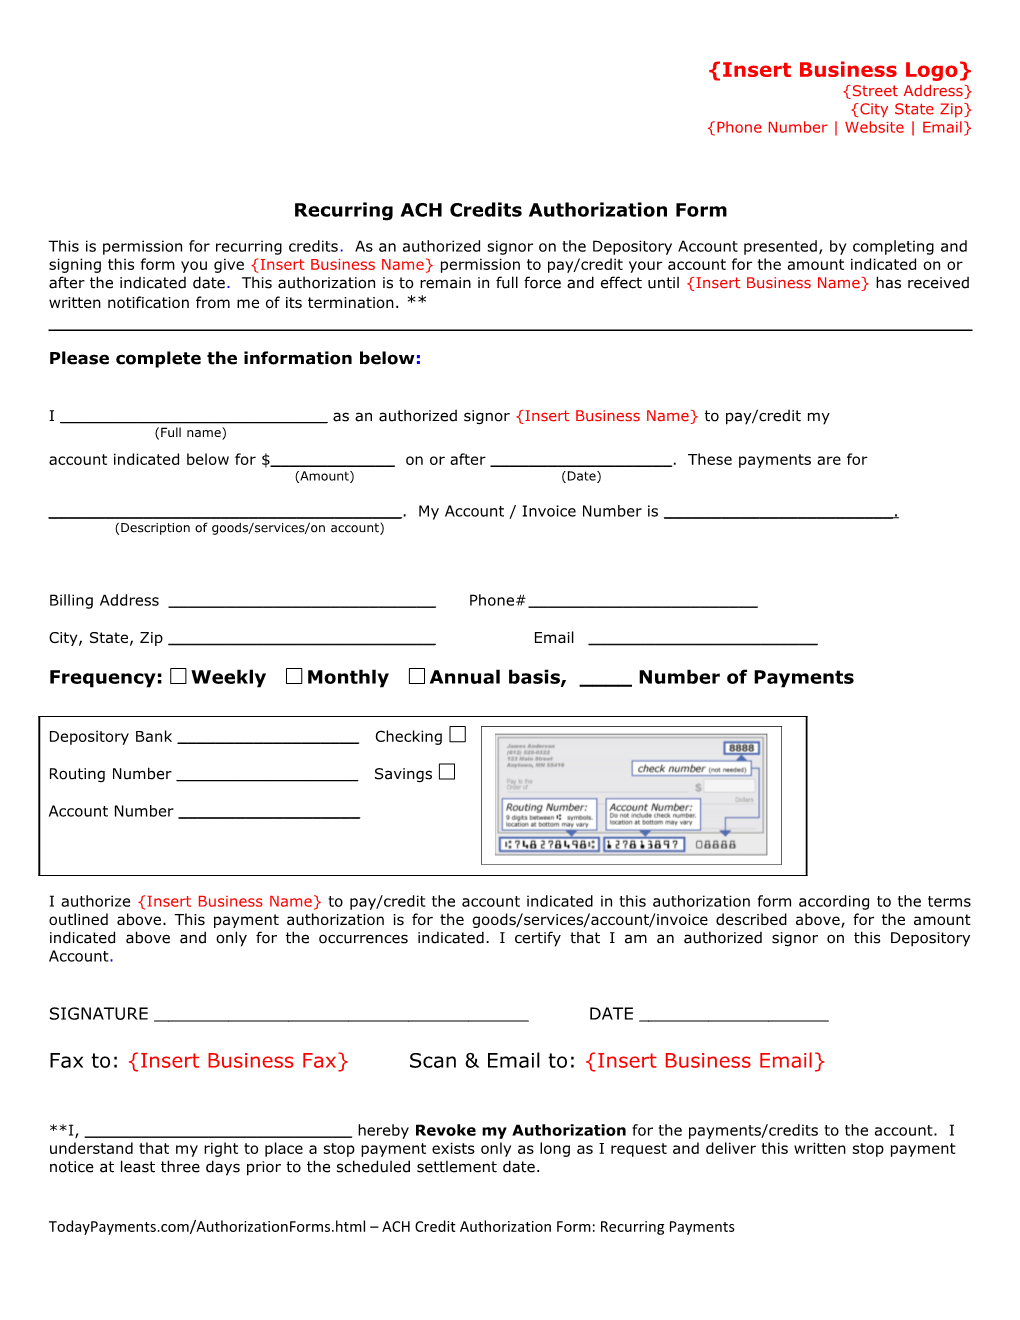 Recurring ACH Credit Authorization Form